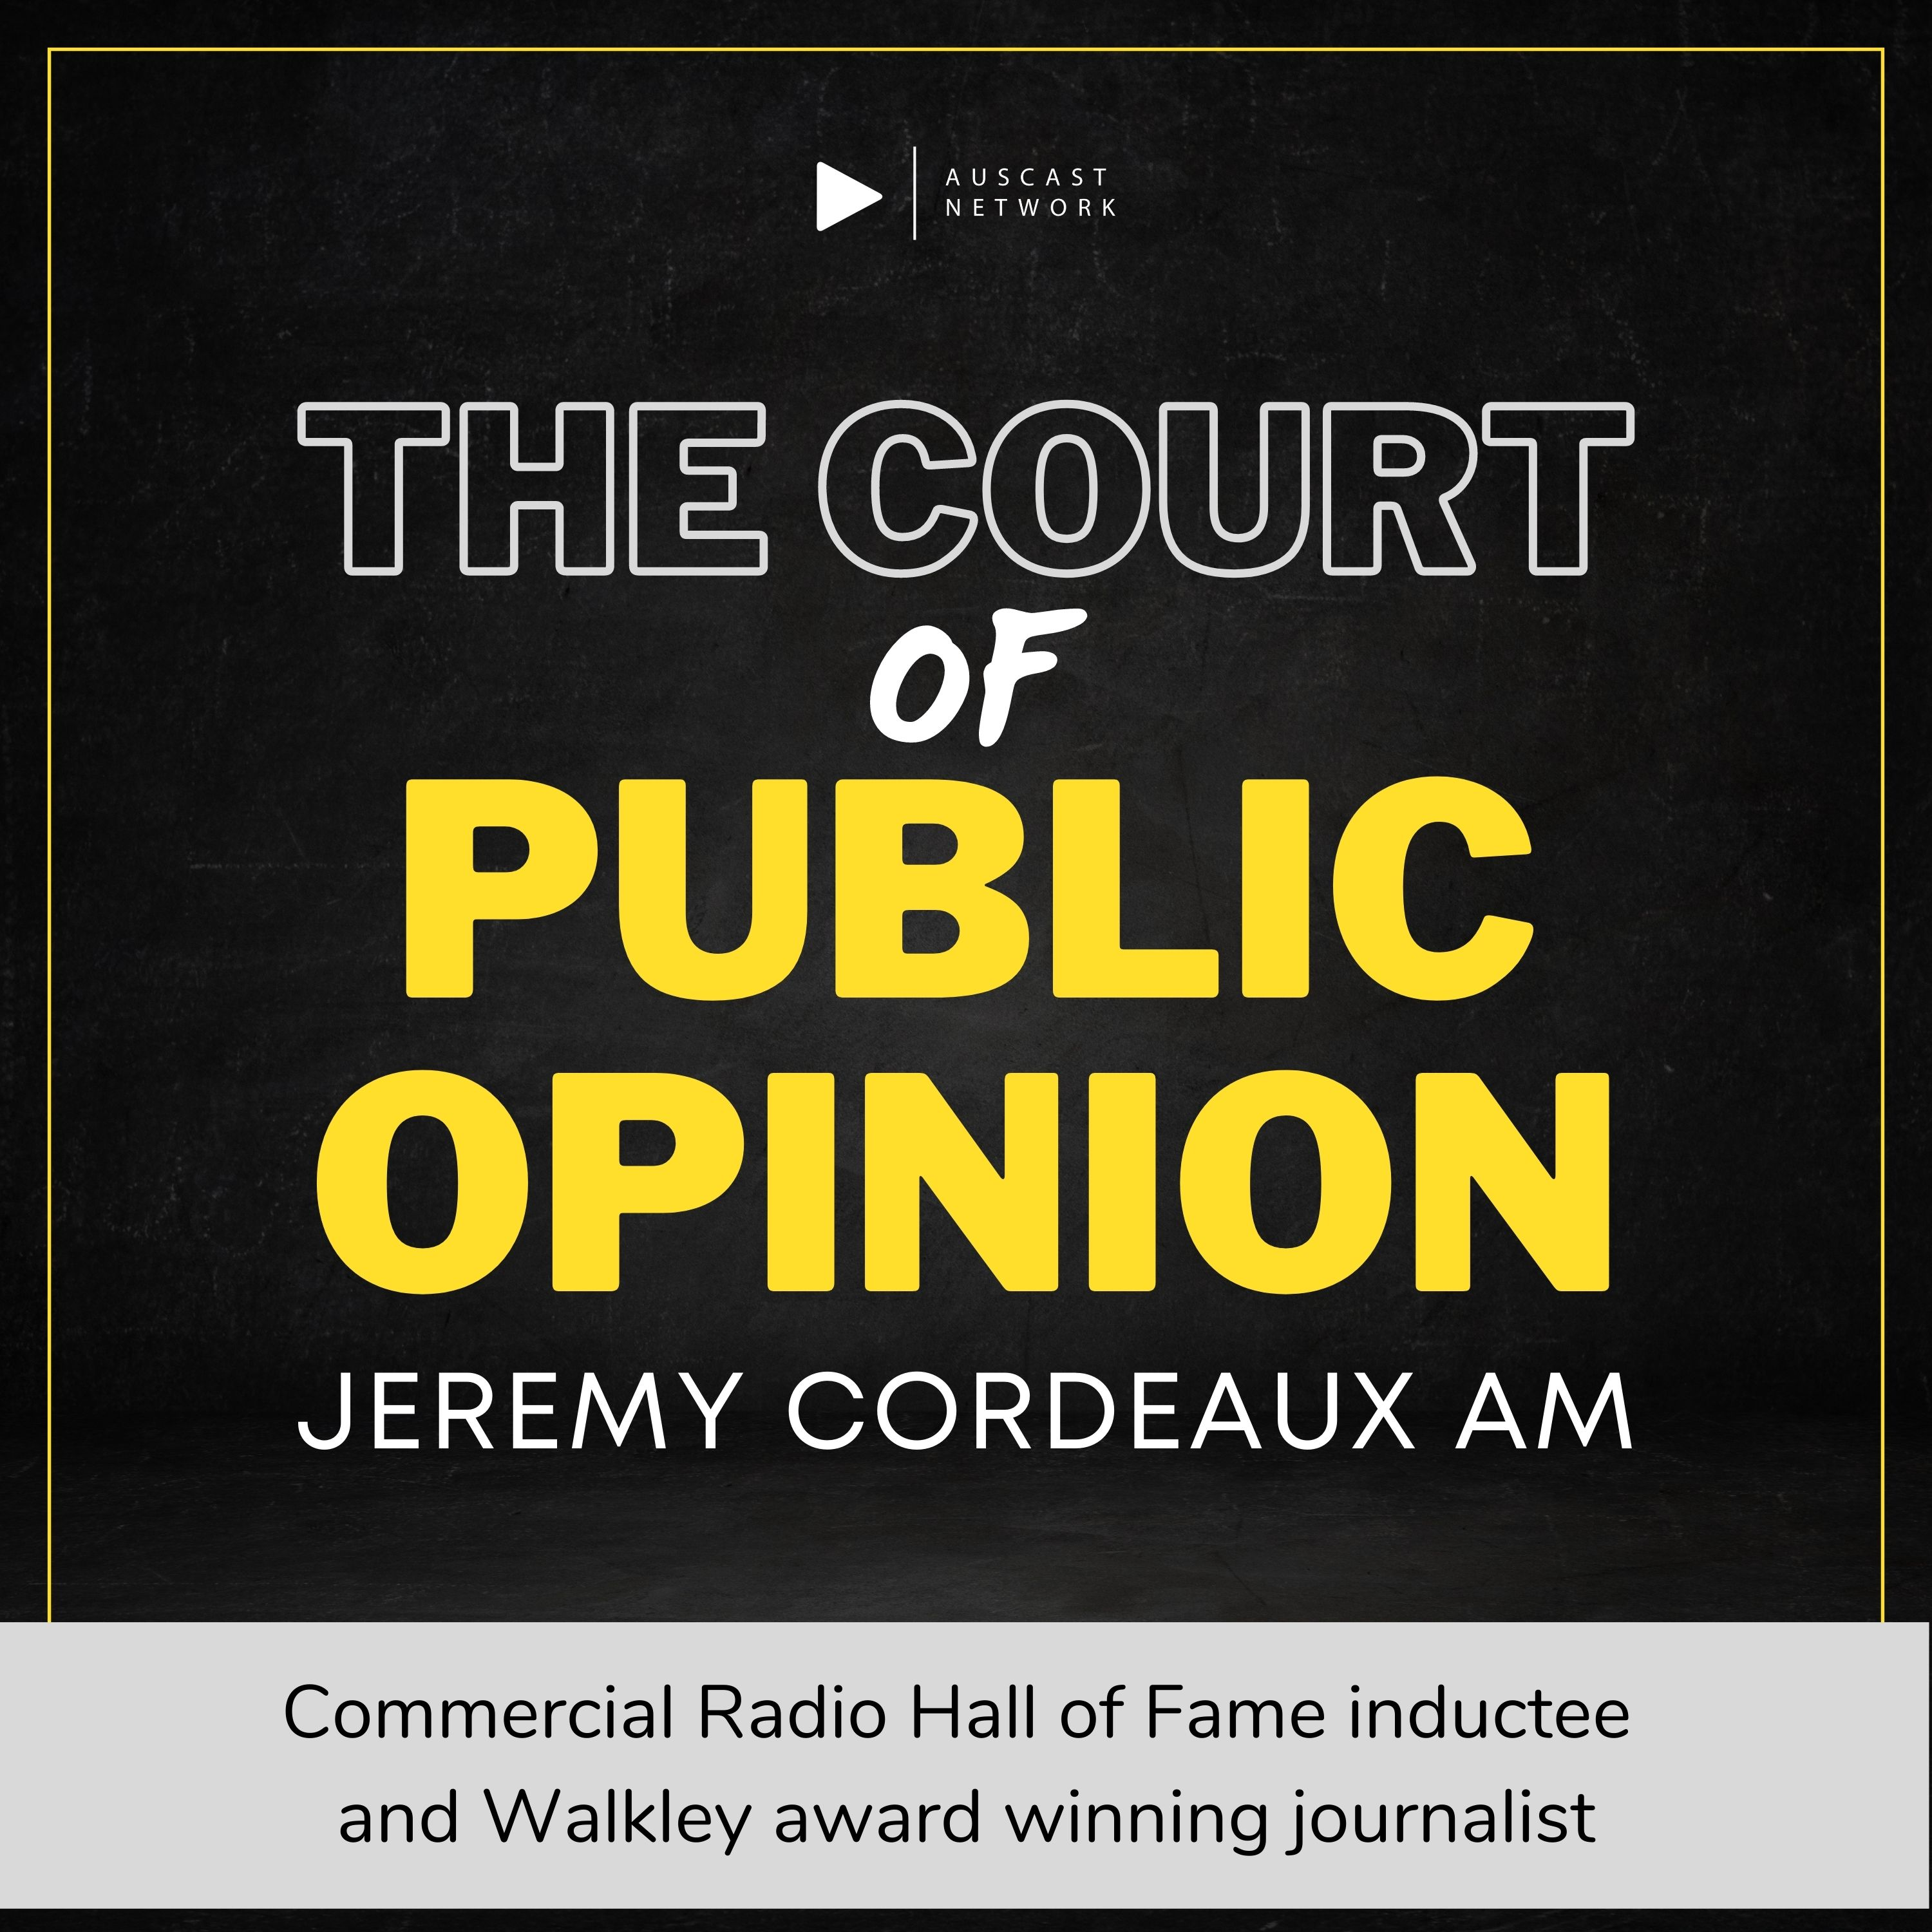 You can support The Court Of Public Opinion